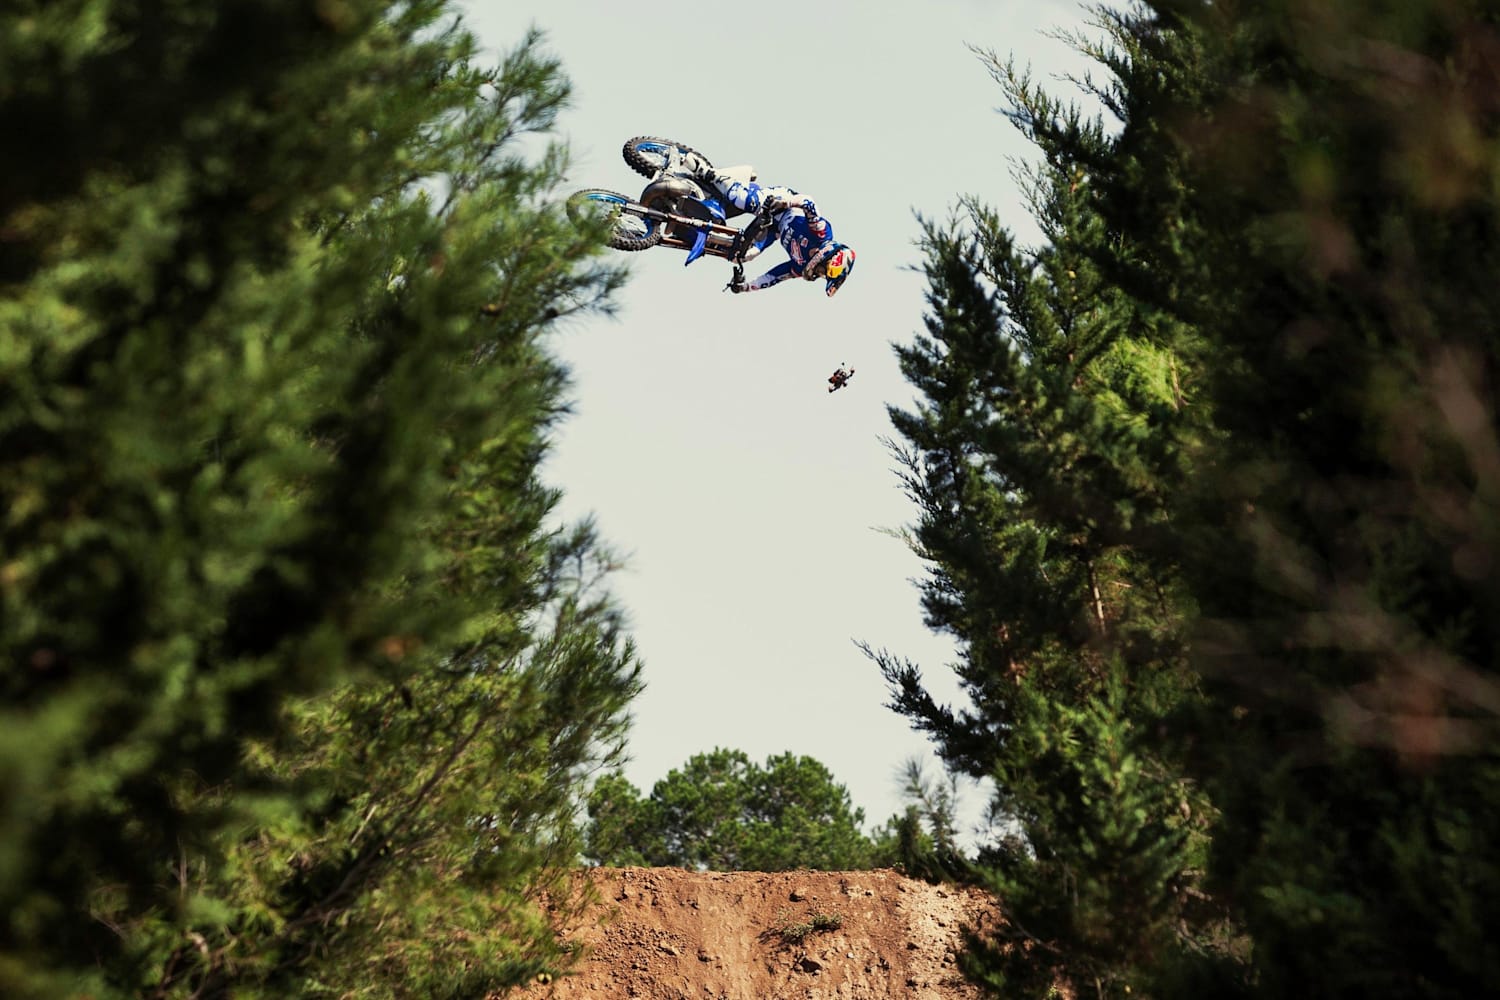 Best FMX videos: 8 freestyle motocross clips to watch